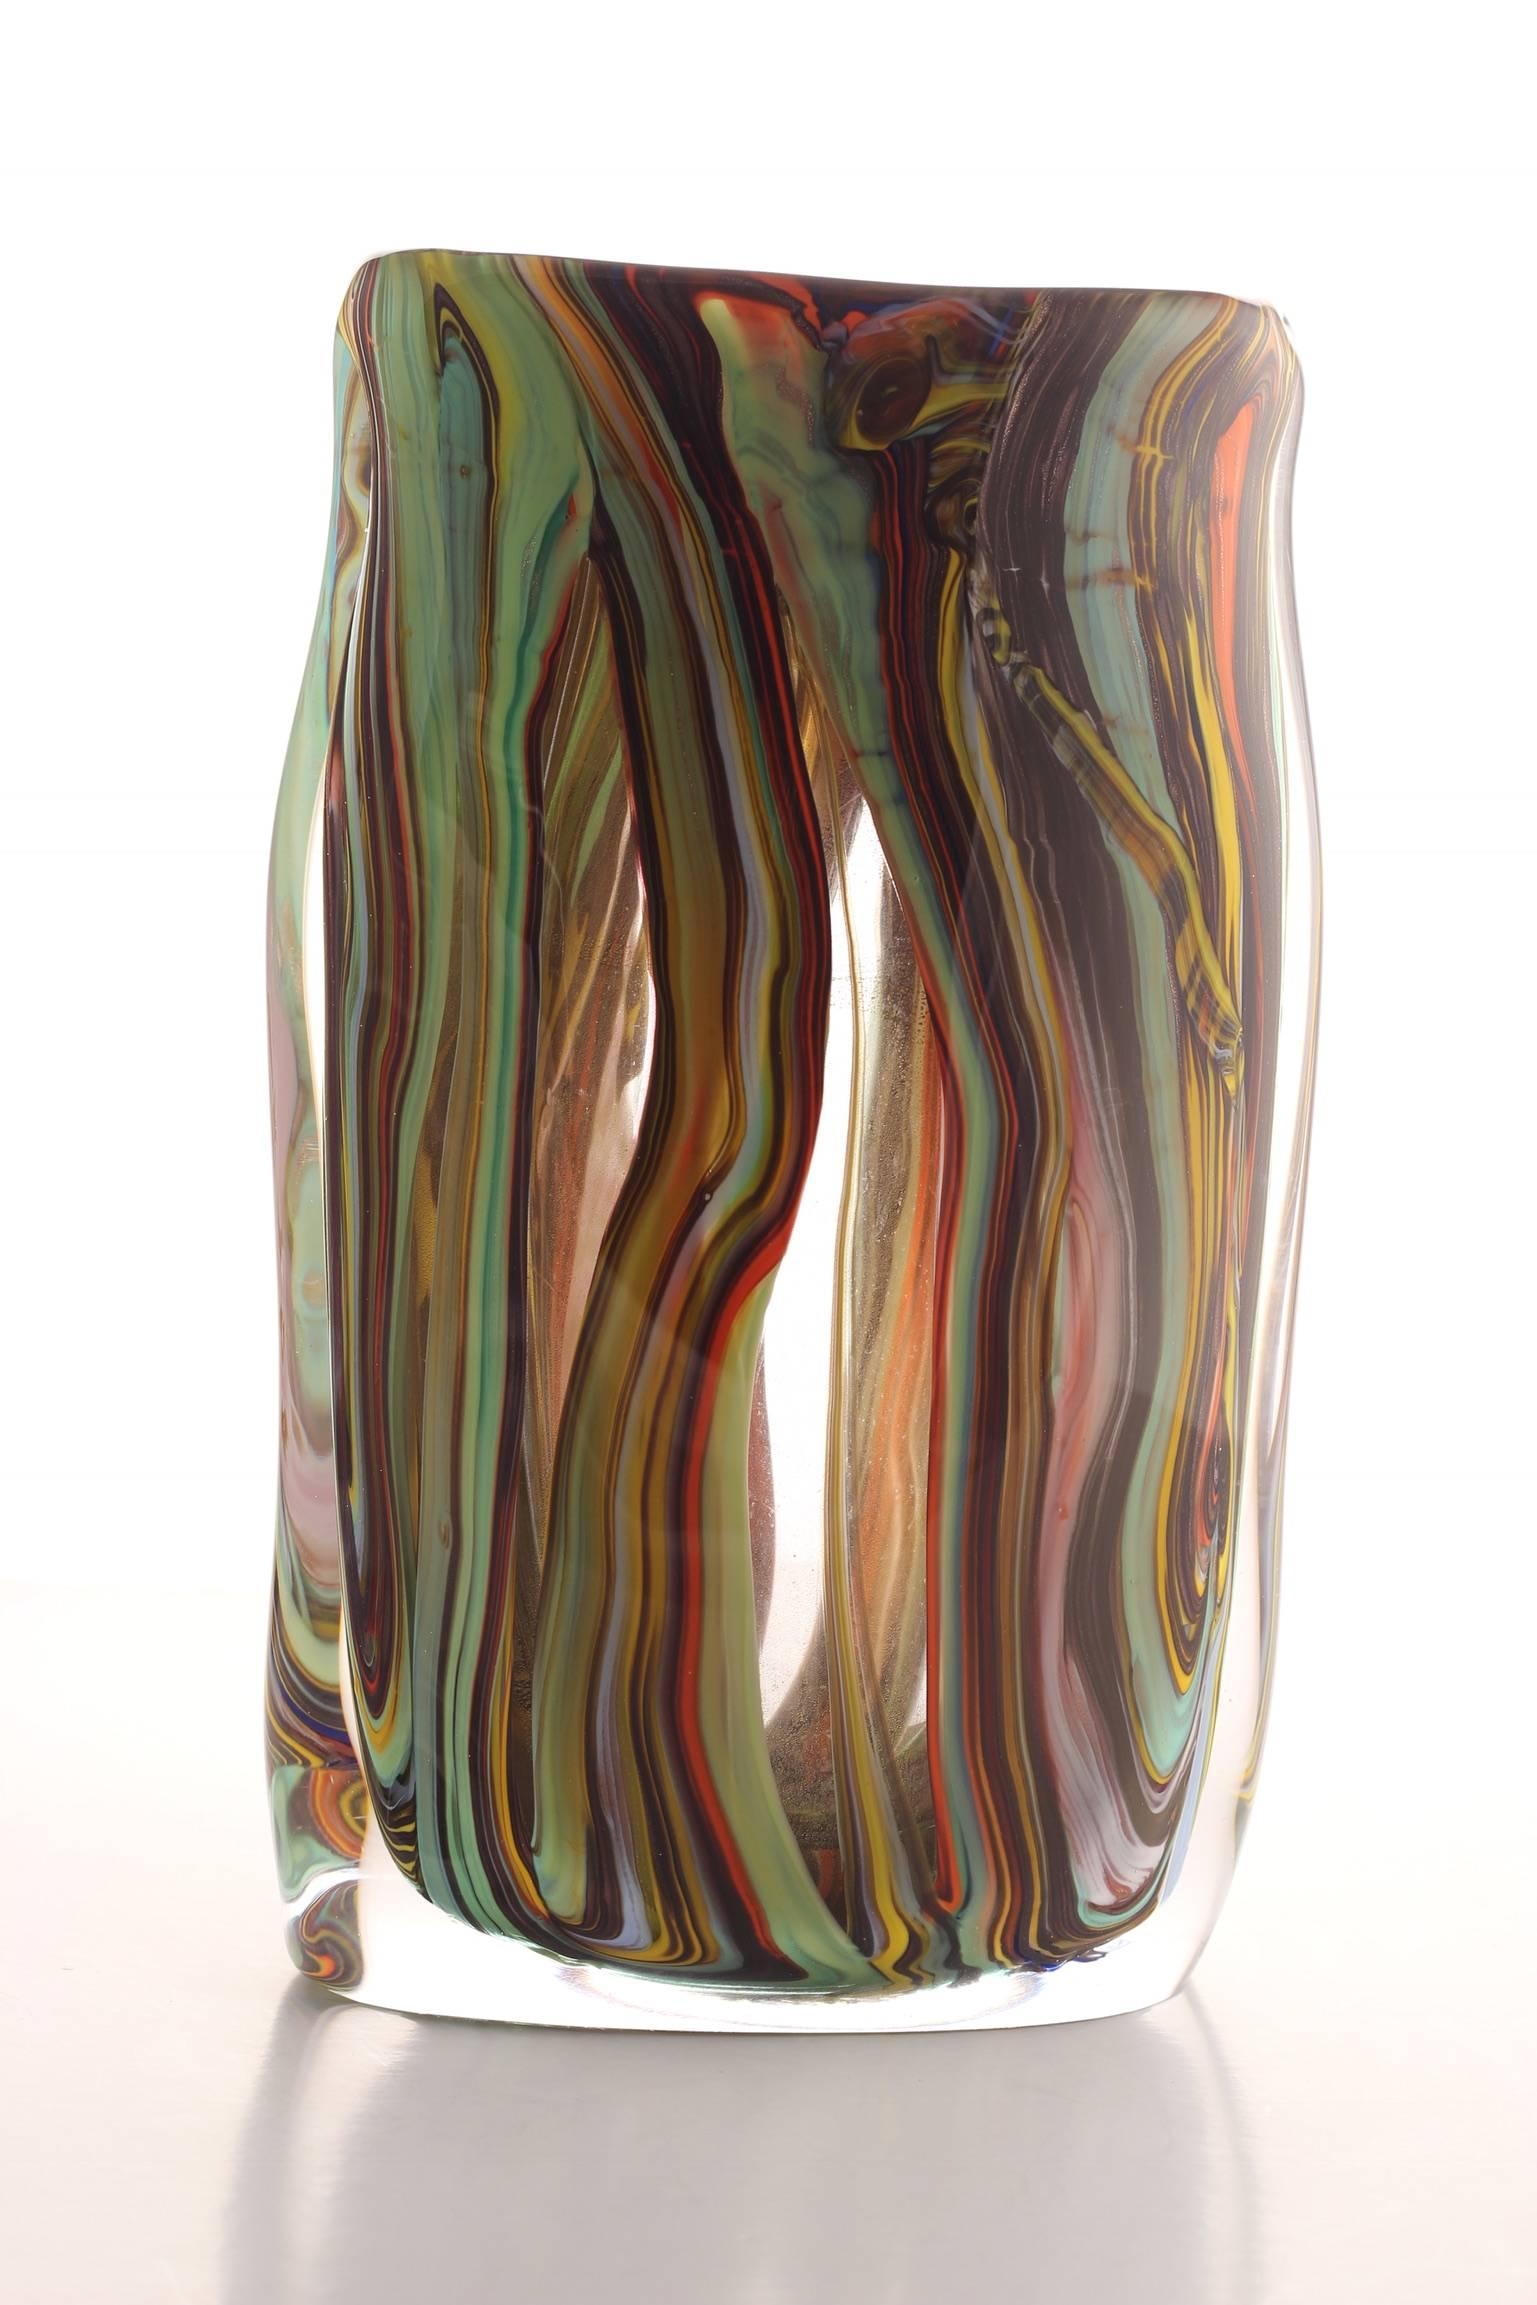 Murano Vase Signed Colored and Gold Vase by Giuliano Tosi 1